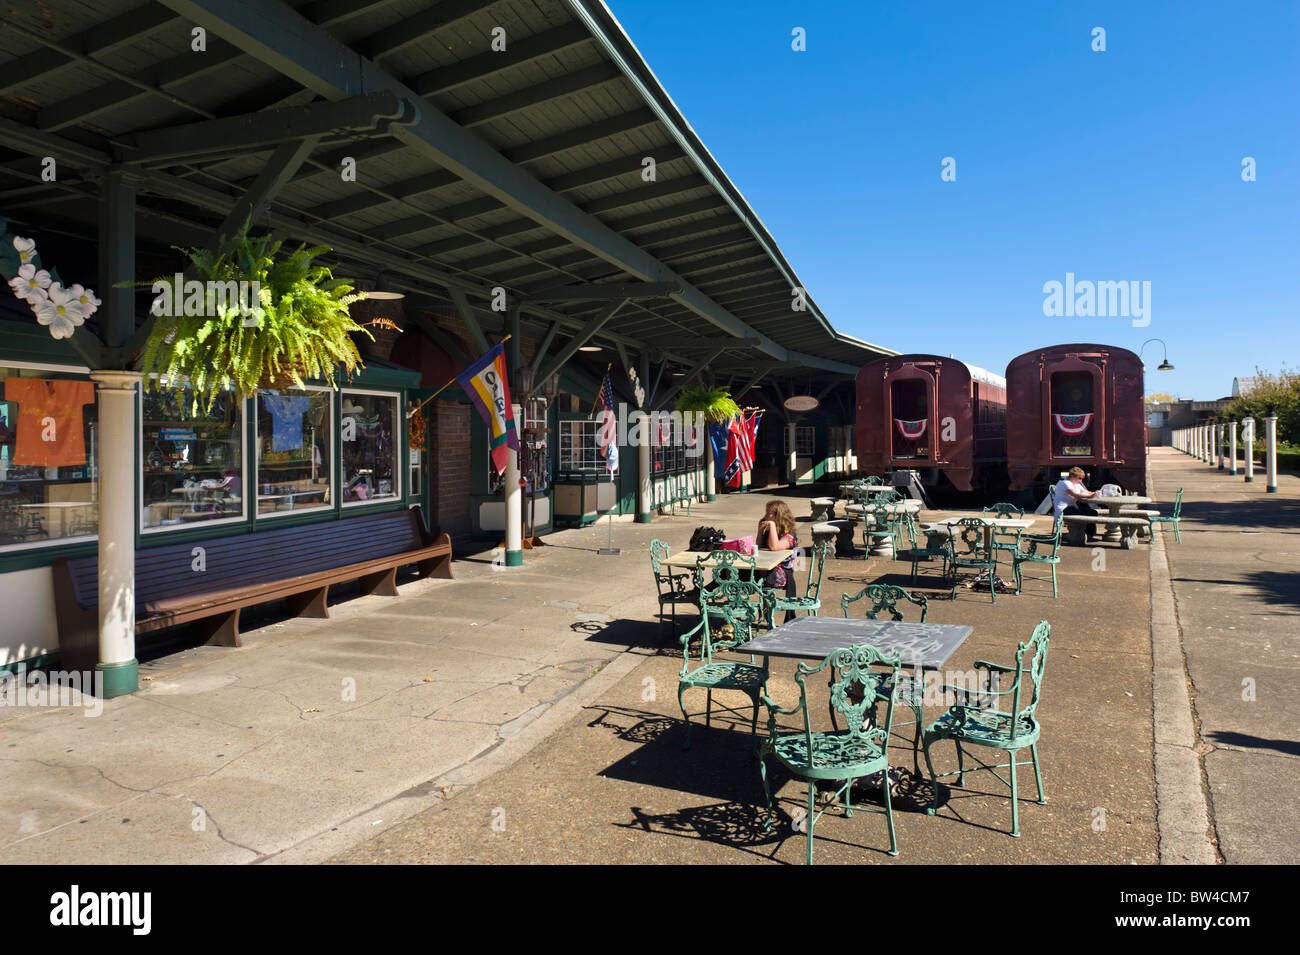 Cafe and shops at the Chattanooga Choo Choo Hotel, formerly the terminal station, Chattanooga, Tennessee, USA Stock Photo